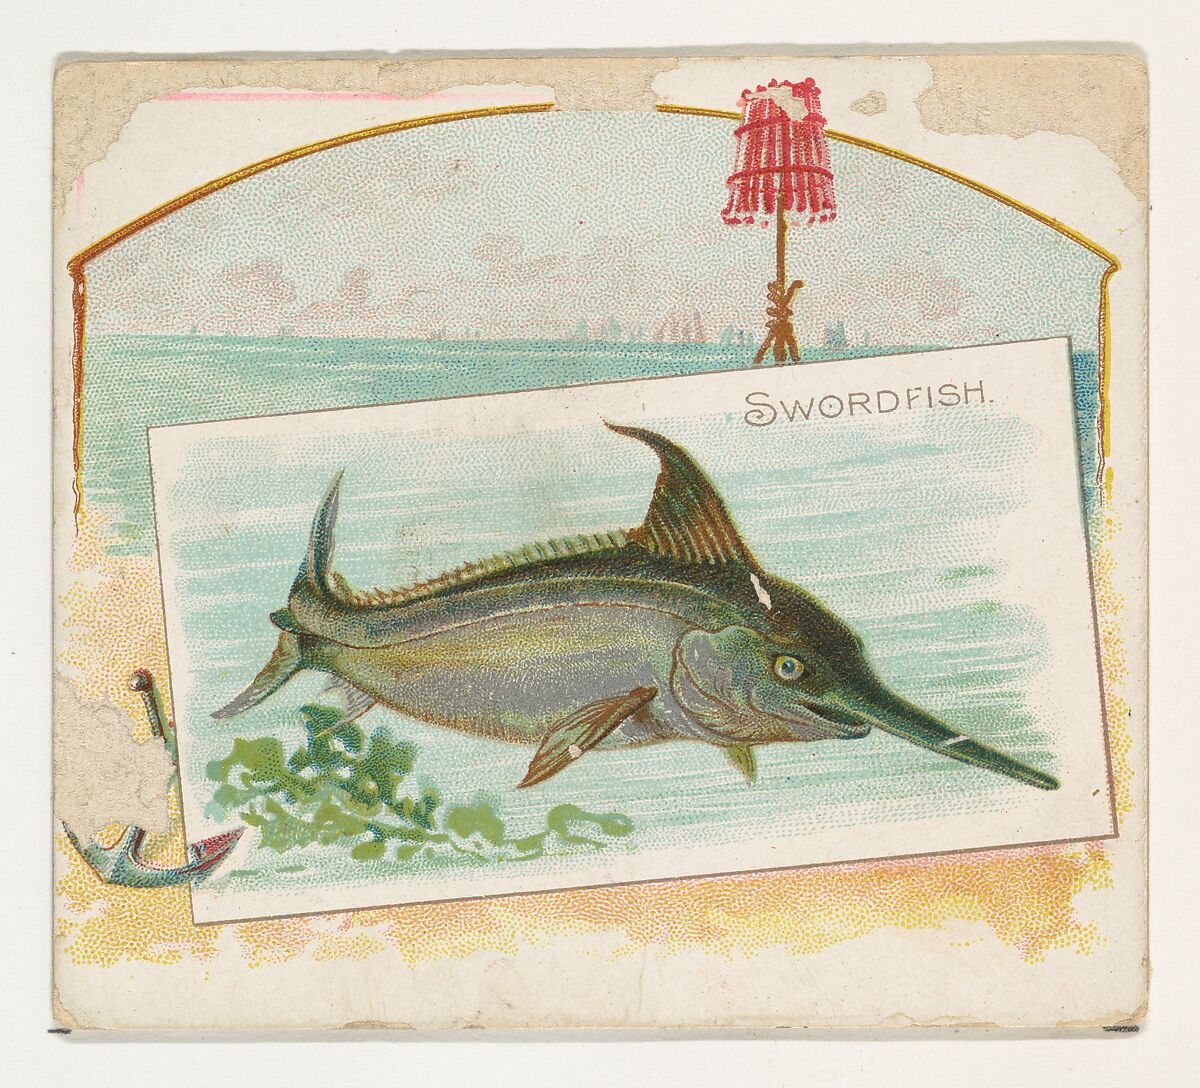 Swordfish, from Fish from American Waters series (N39) for Allen & Ginter Cigarettes, Issued by Allen &amp; Ginter (American, Richmond, Virginia), Commercial color lithograph 